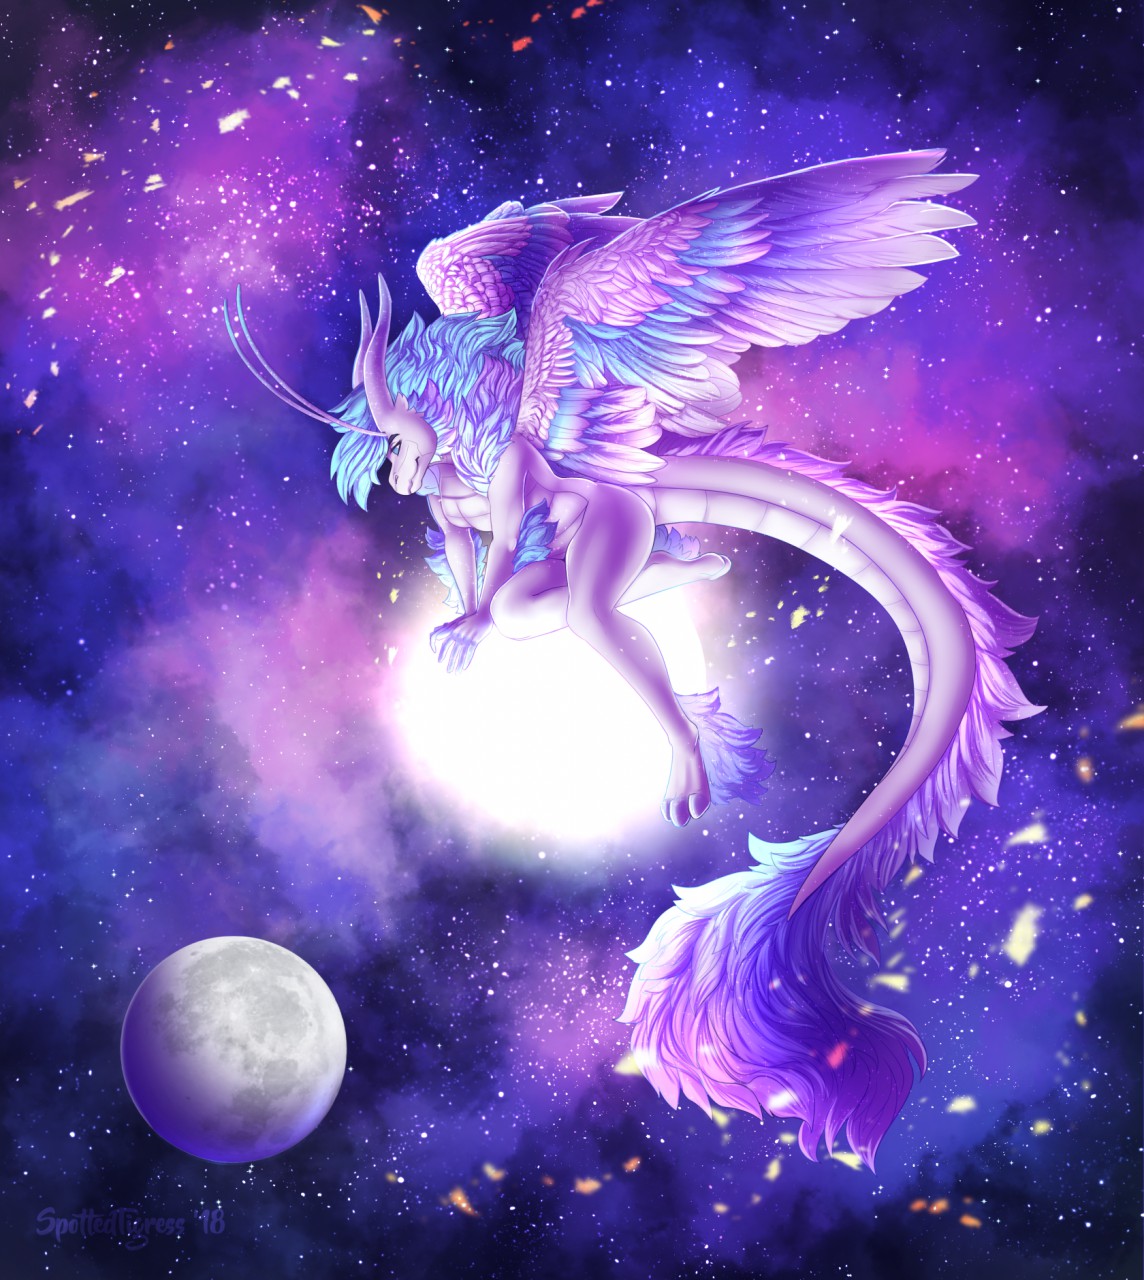 Share more than 56 galaxy dragon wallpaper latest - in.cdgdbentre